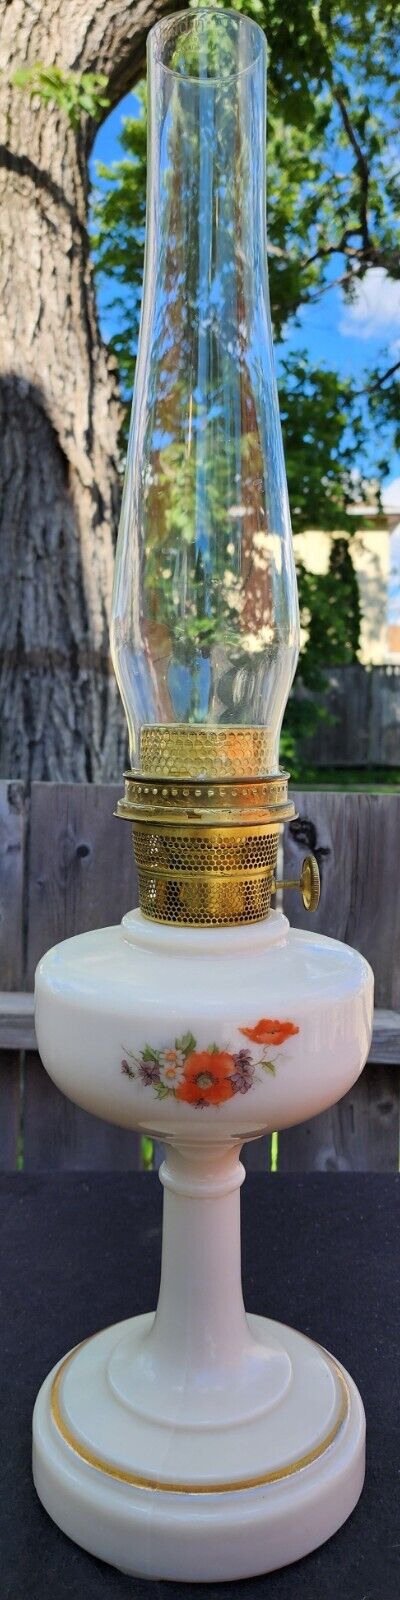 UNUSED ALADDIN SIMPLICITY B-26 OIL LAMP ALACITE IVORY COLOR WITH DECAL COMPLETE